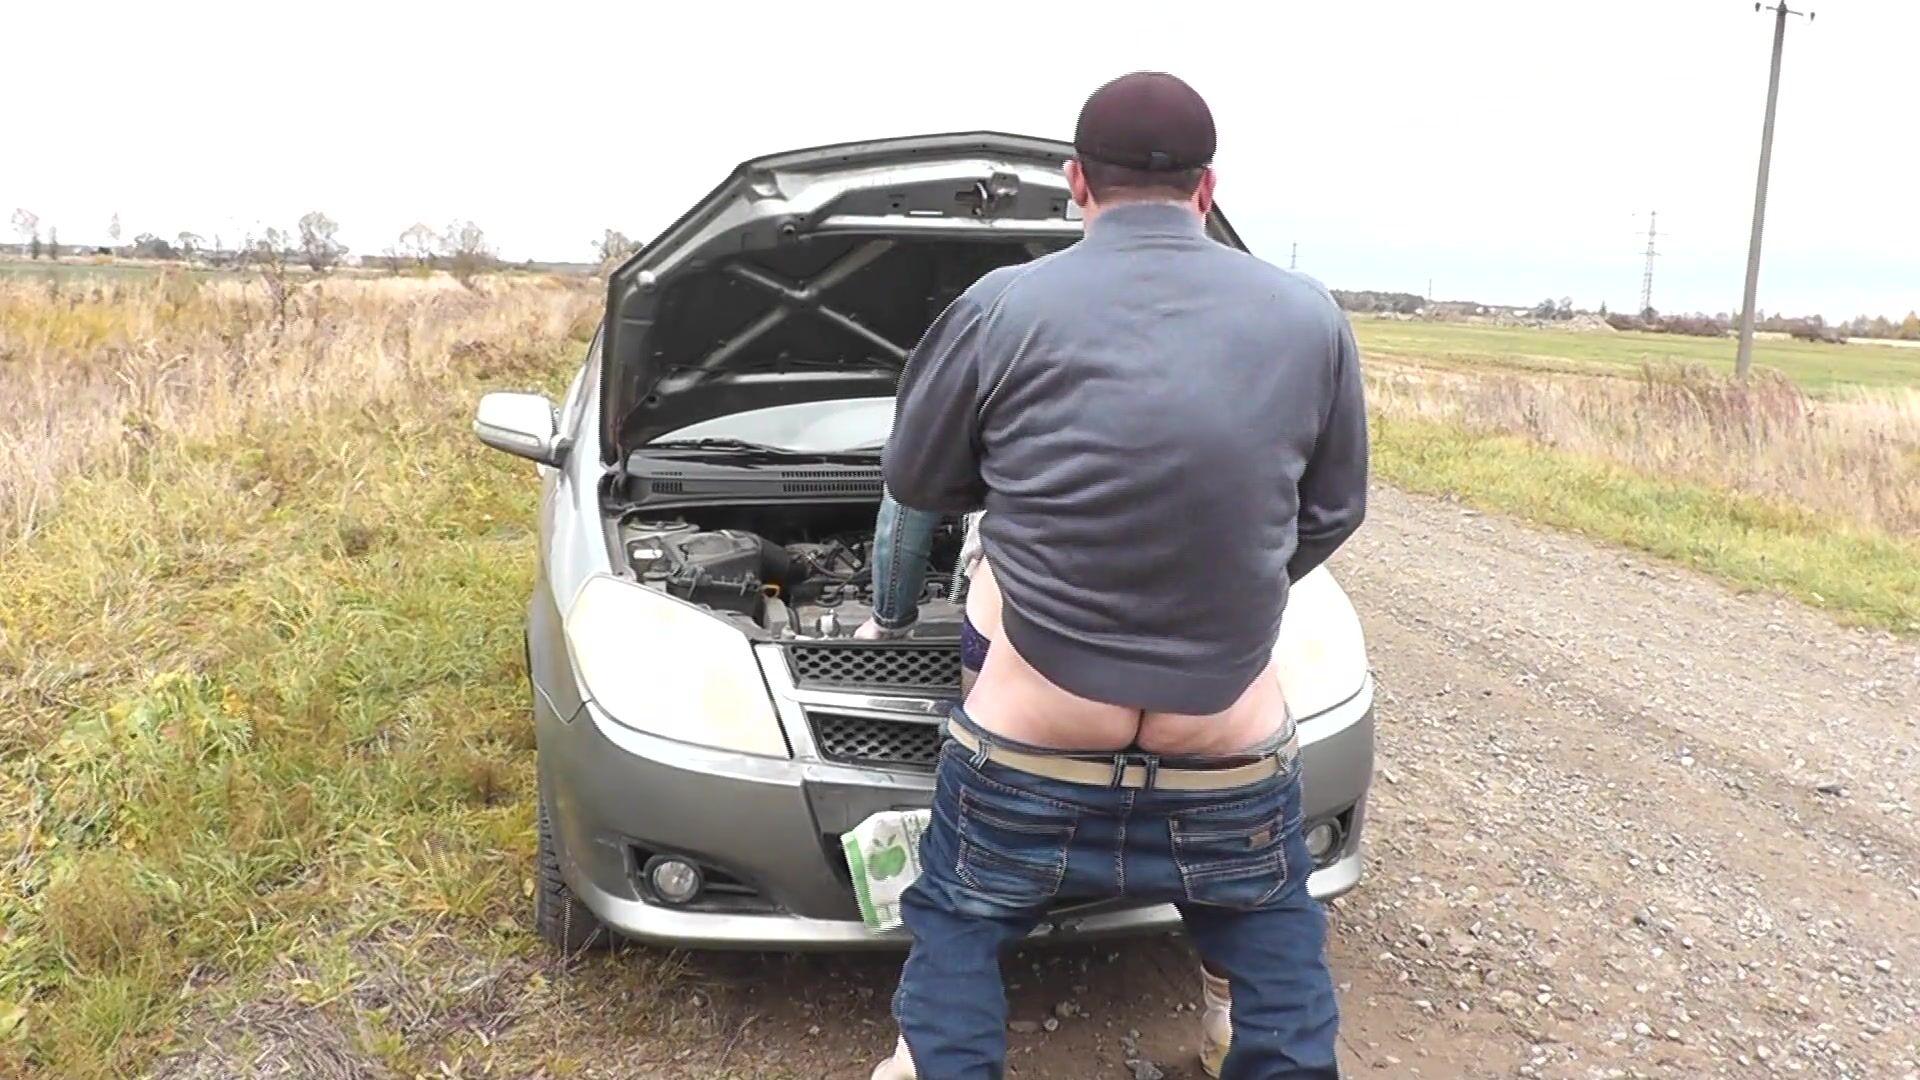 Random passerby man helped to repair car DuBarry and fucked doggy style on hood auto pic image